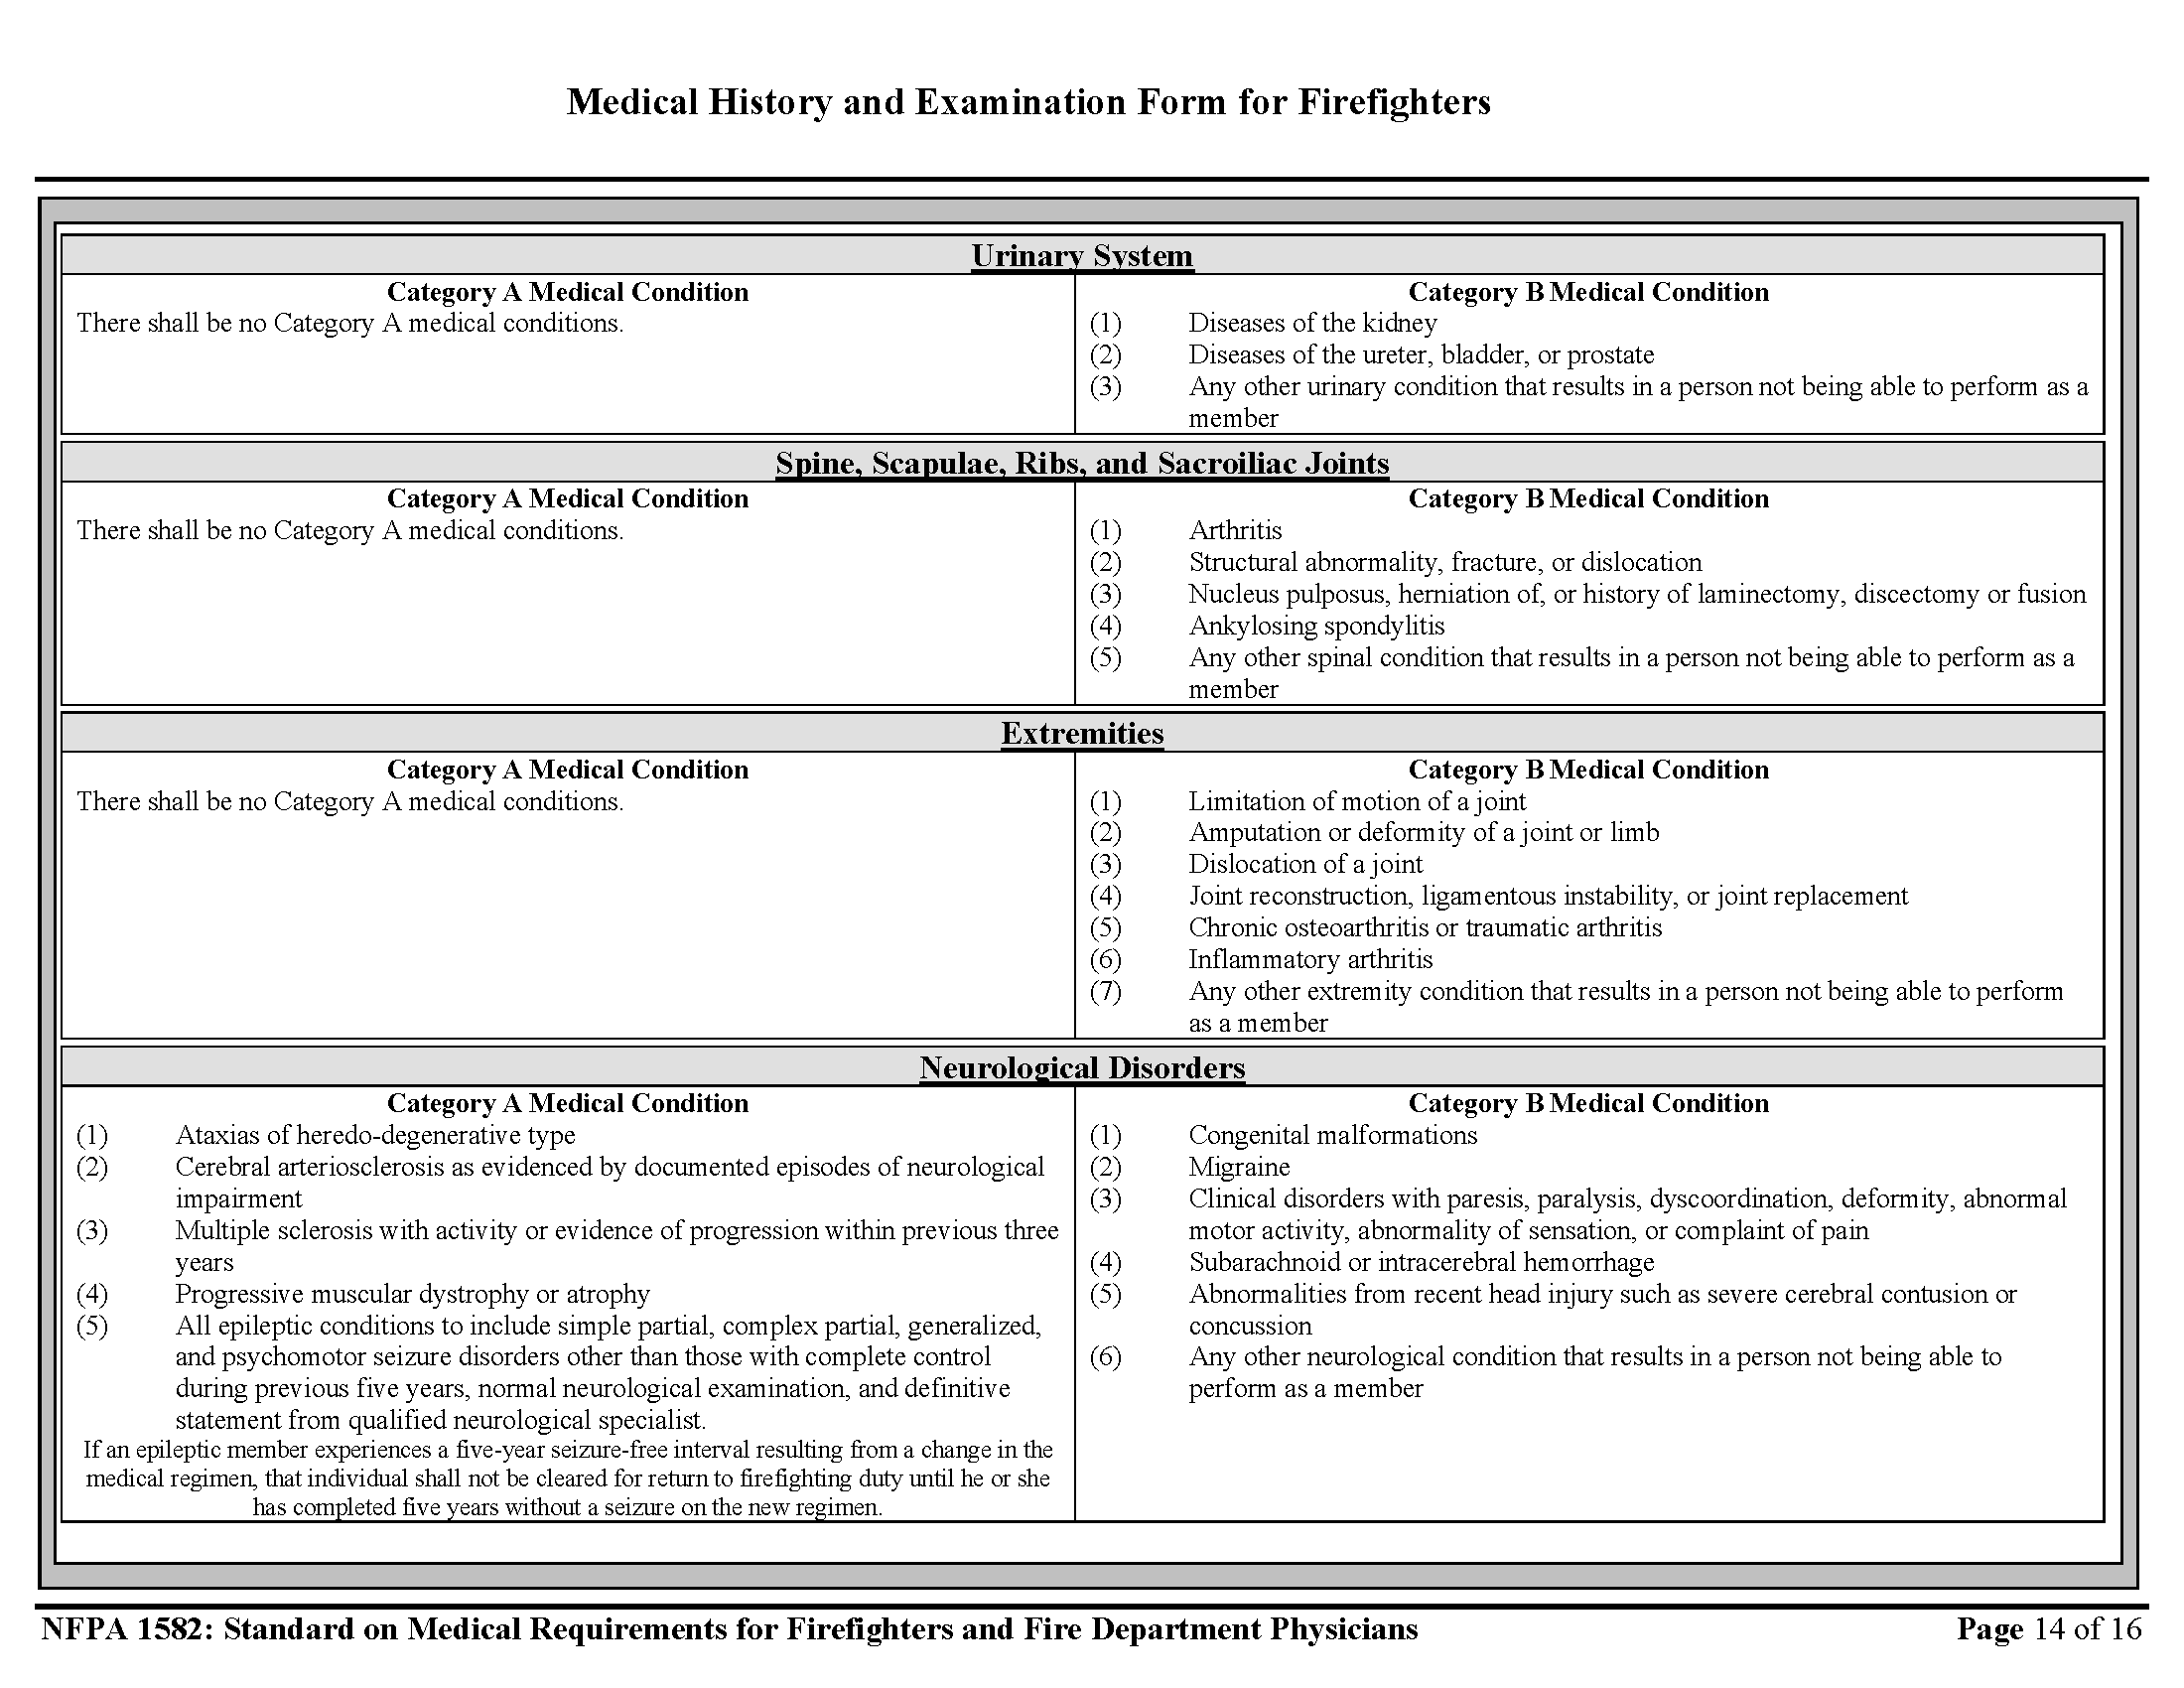 nfpa-form-1582-firefighter-physical-brown-clermont-adult-career